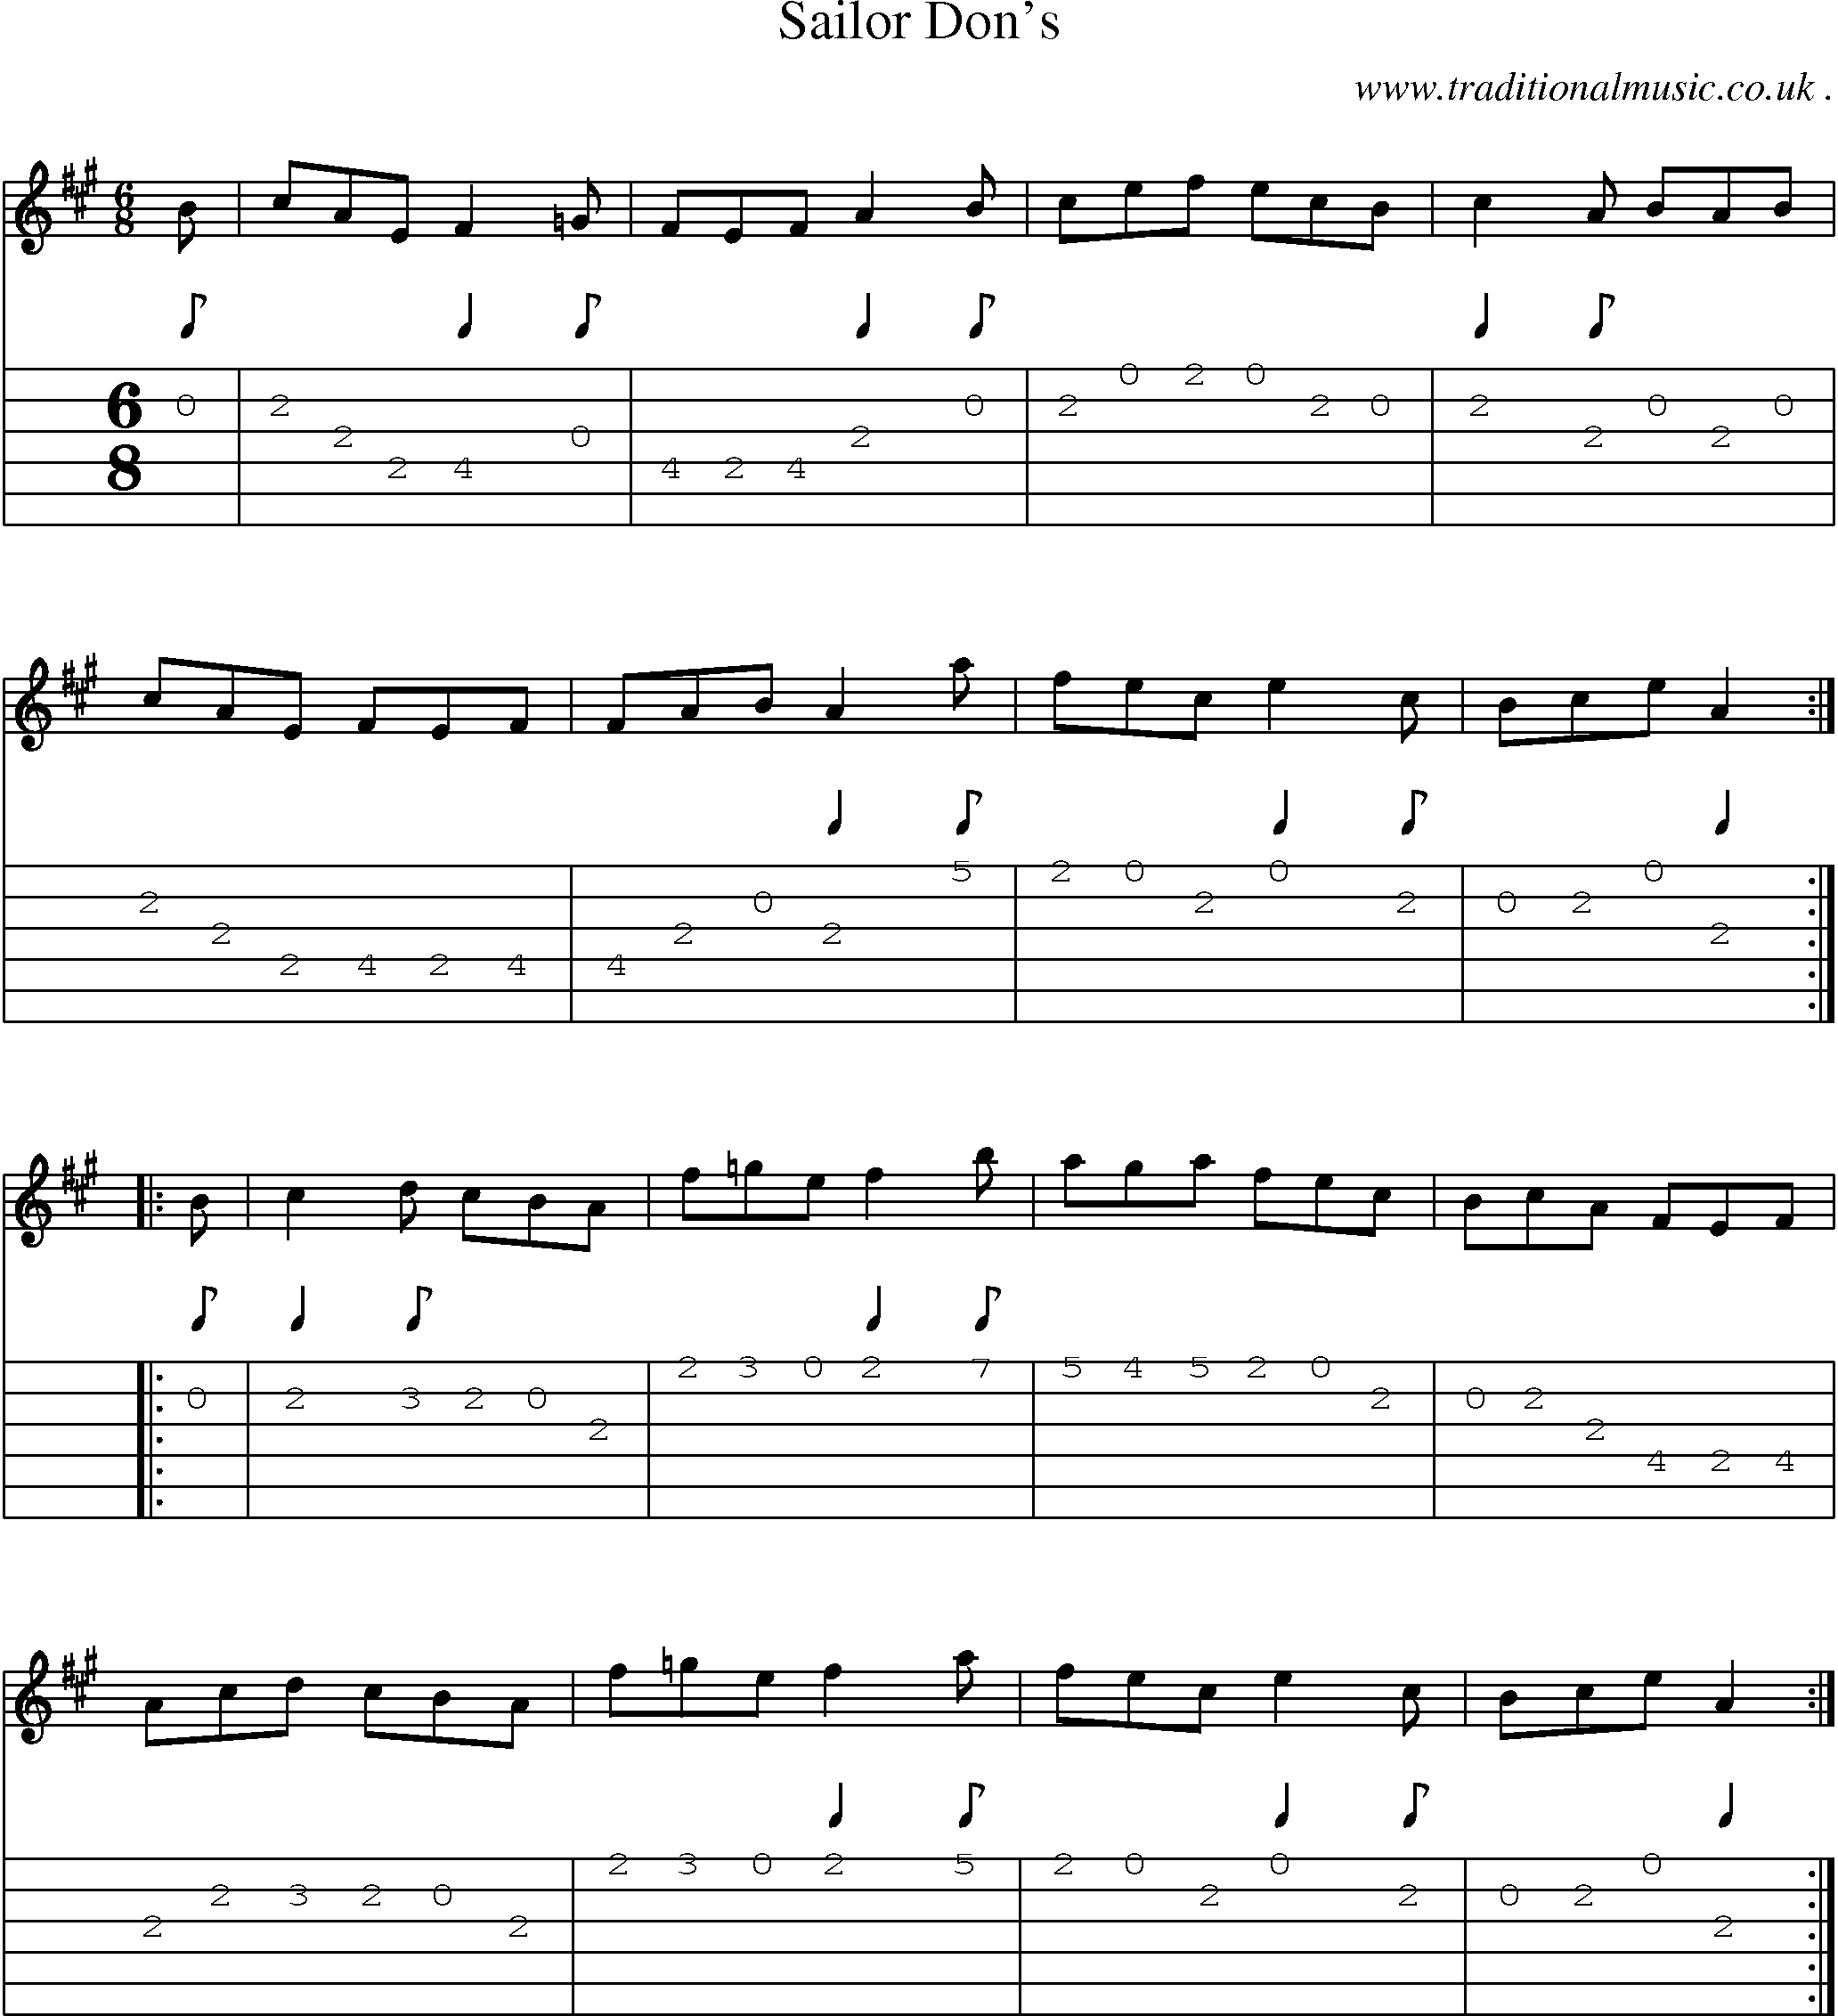 Sheet-Music and Guitar Tabs for Sailor Dons